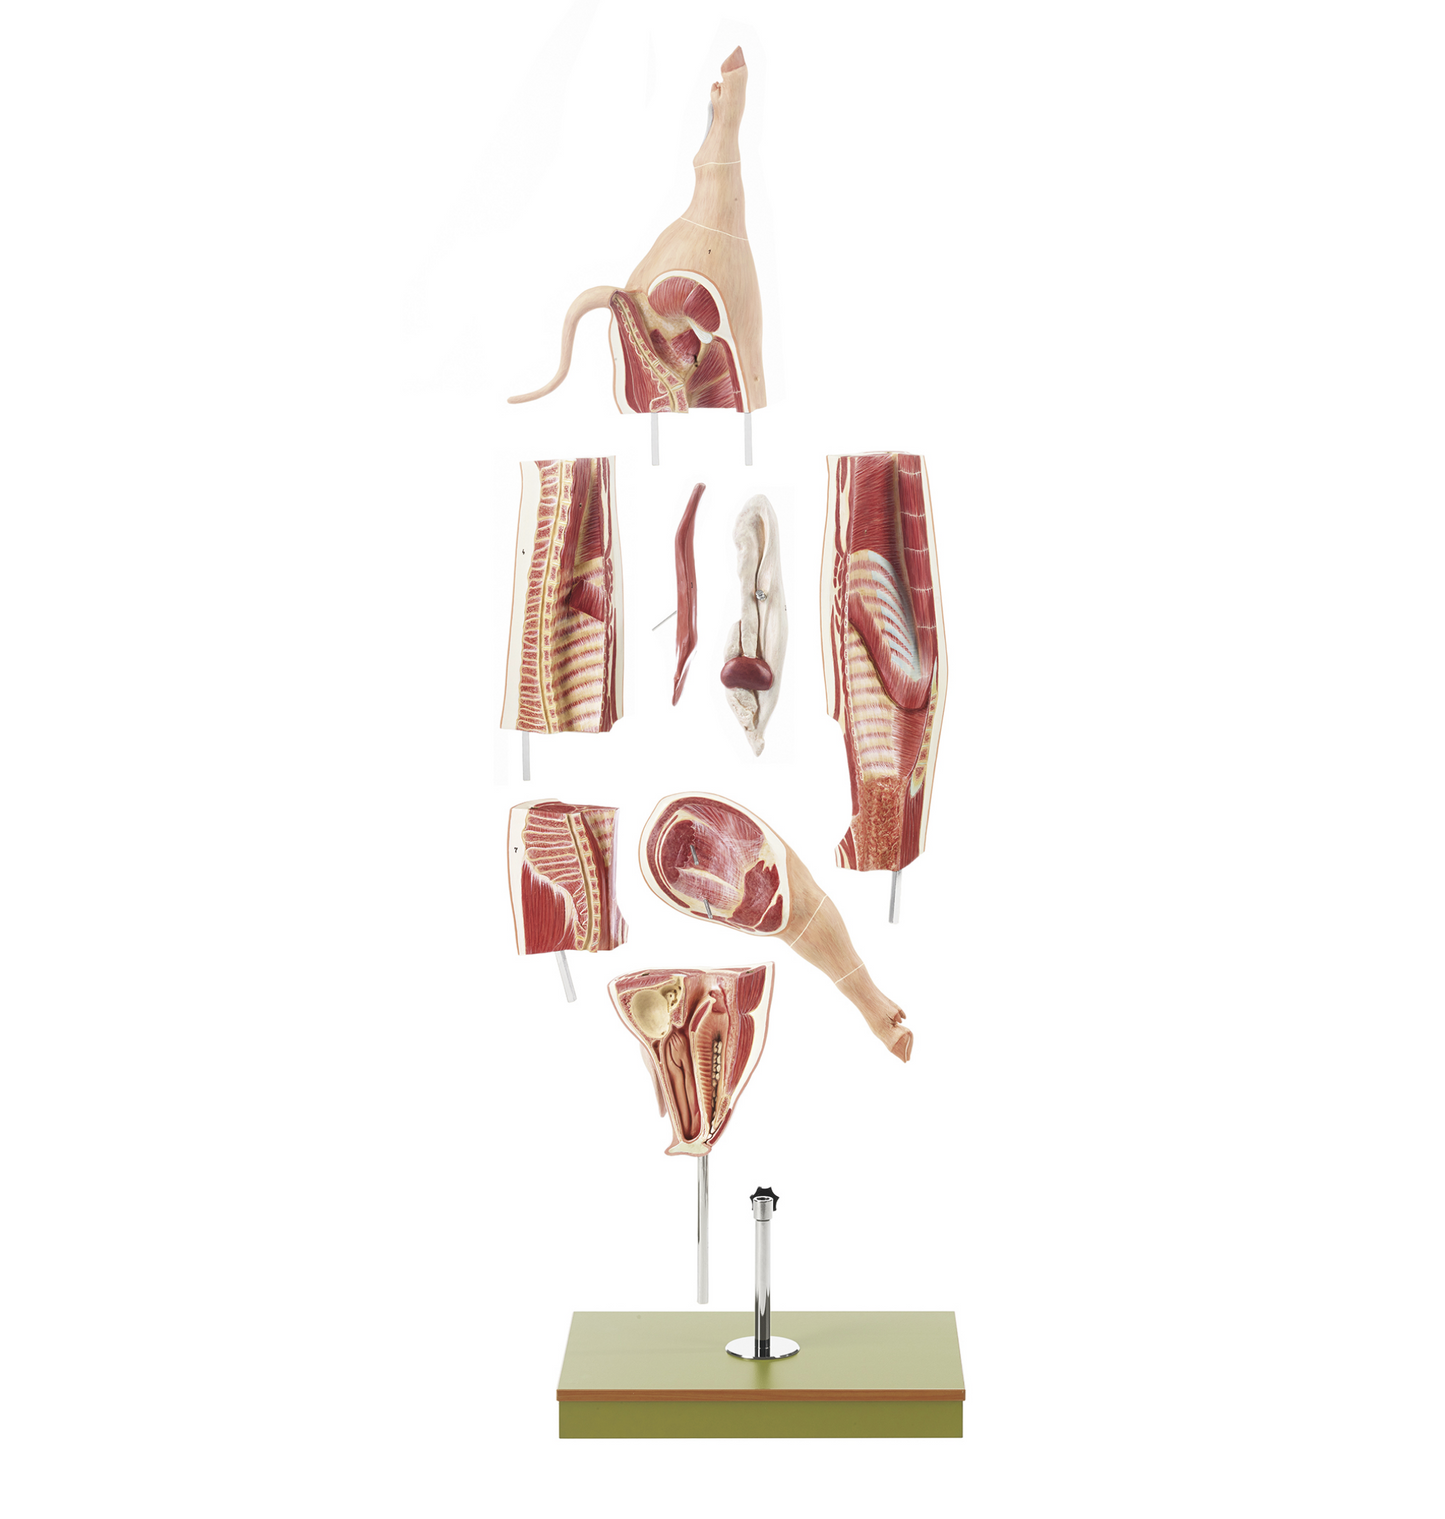 Model of a slaughter pig which can be divided into 8 parts